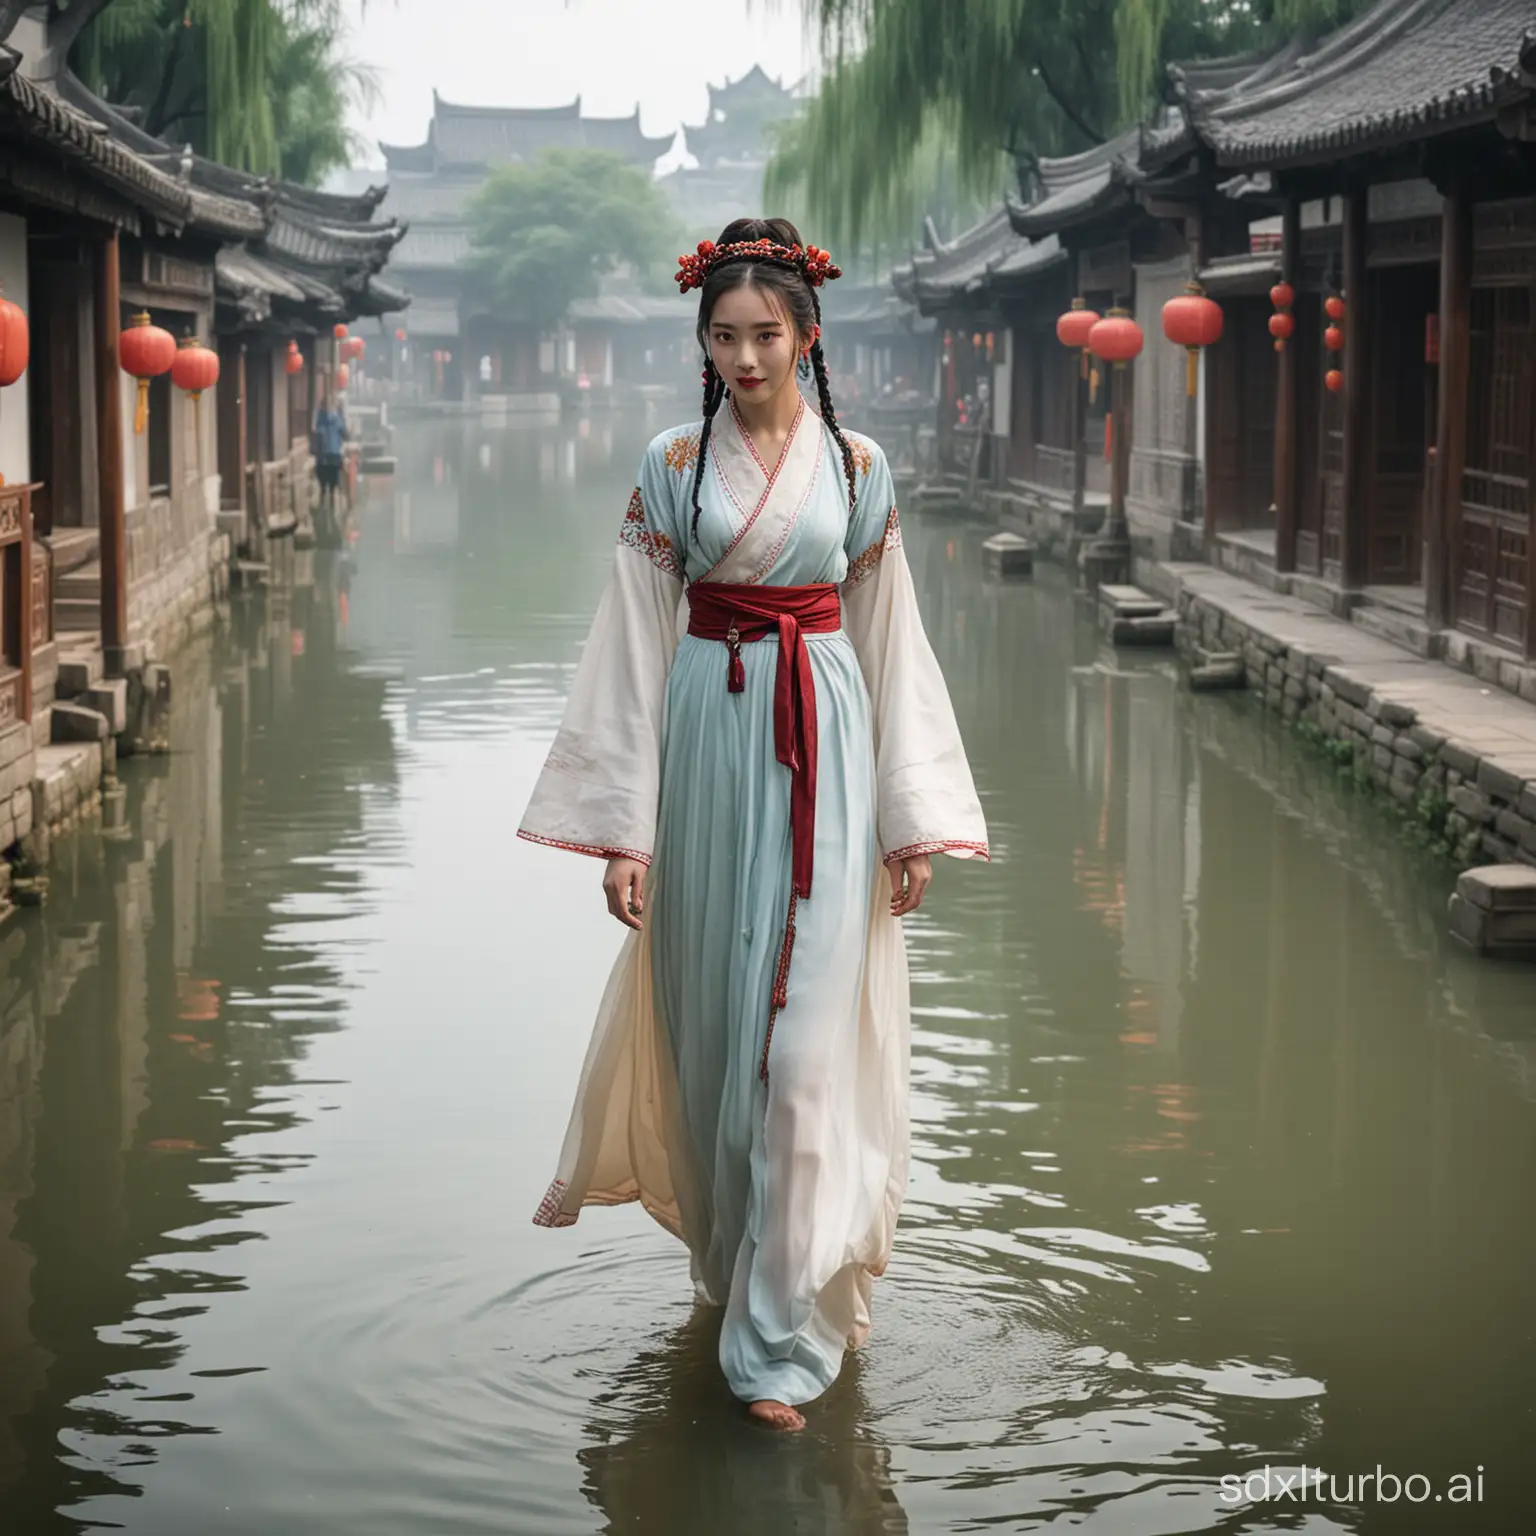 The girl in ancient costume walking in the water town of Jiangnan